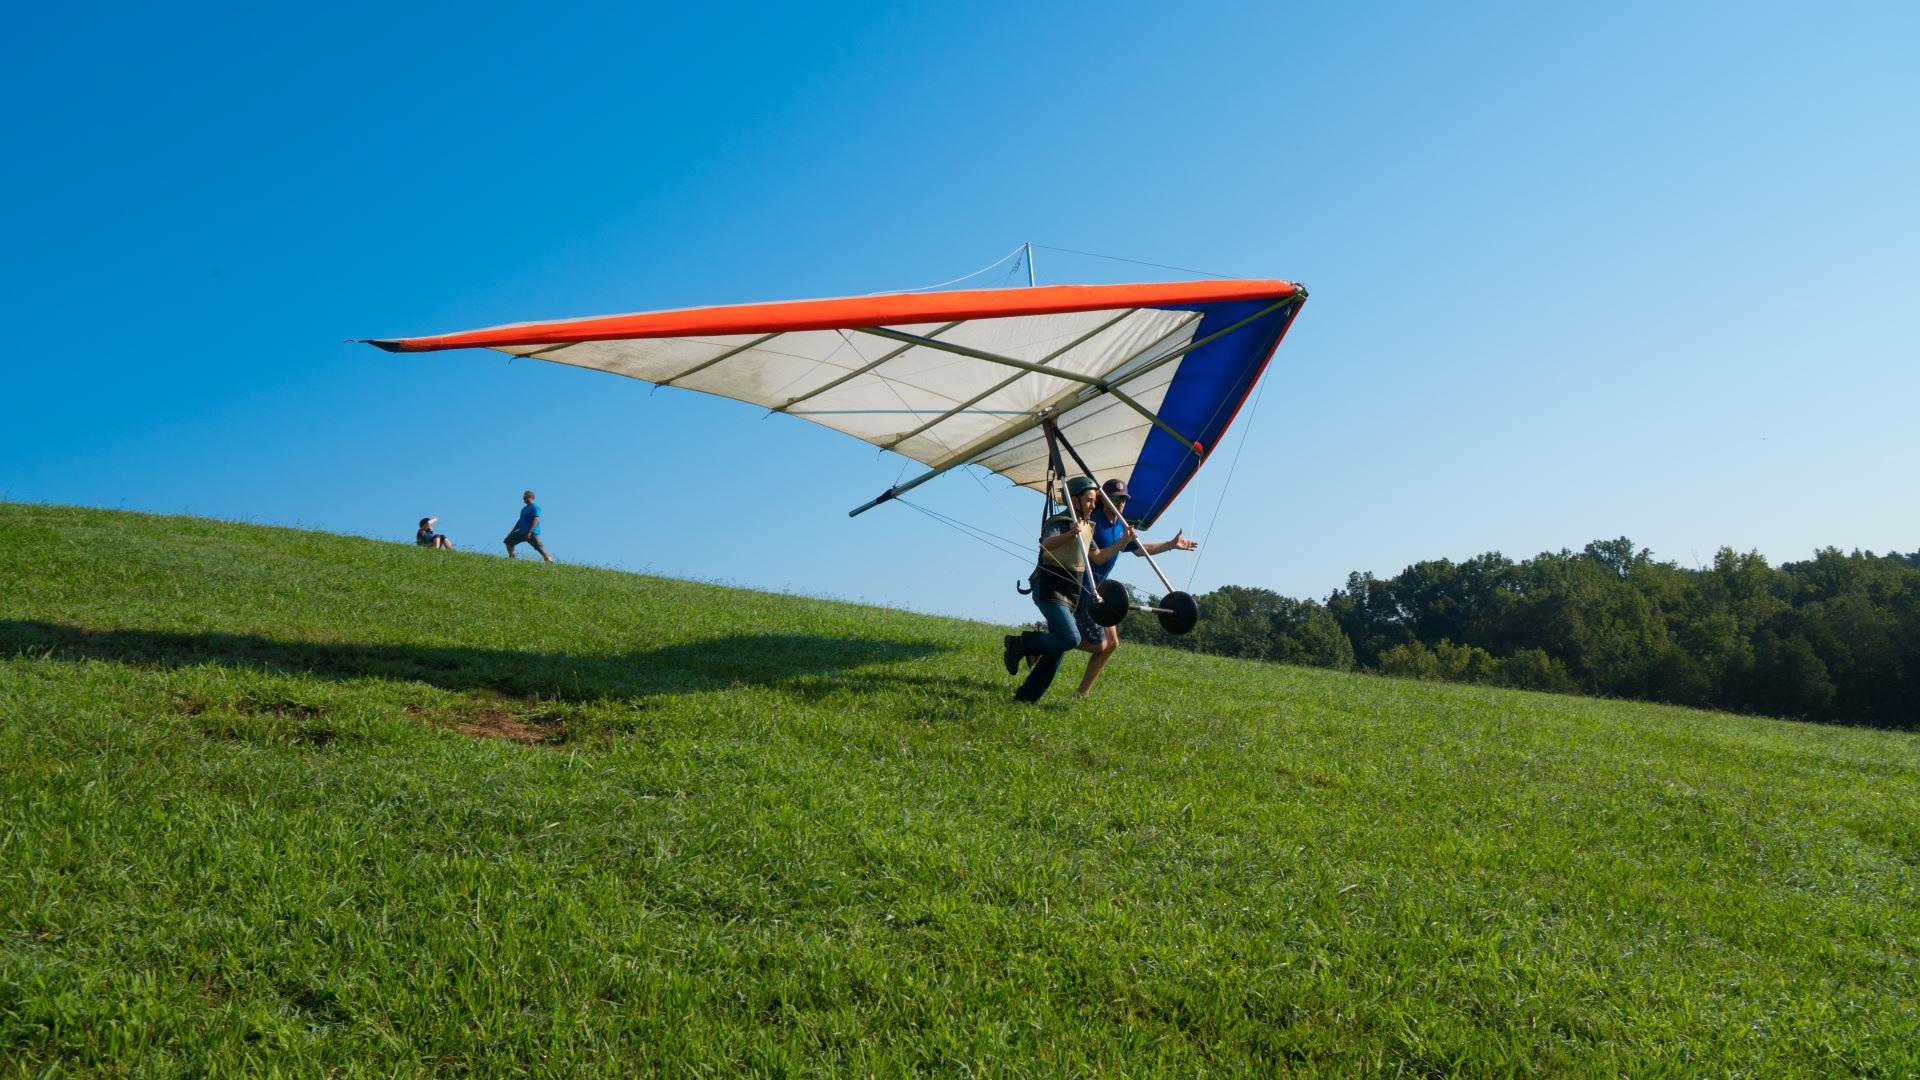 Hang gliding on Lookout Mountain. The best in the world